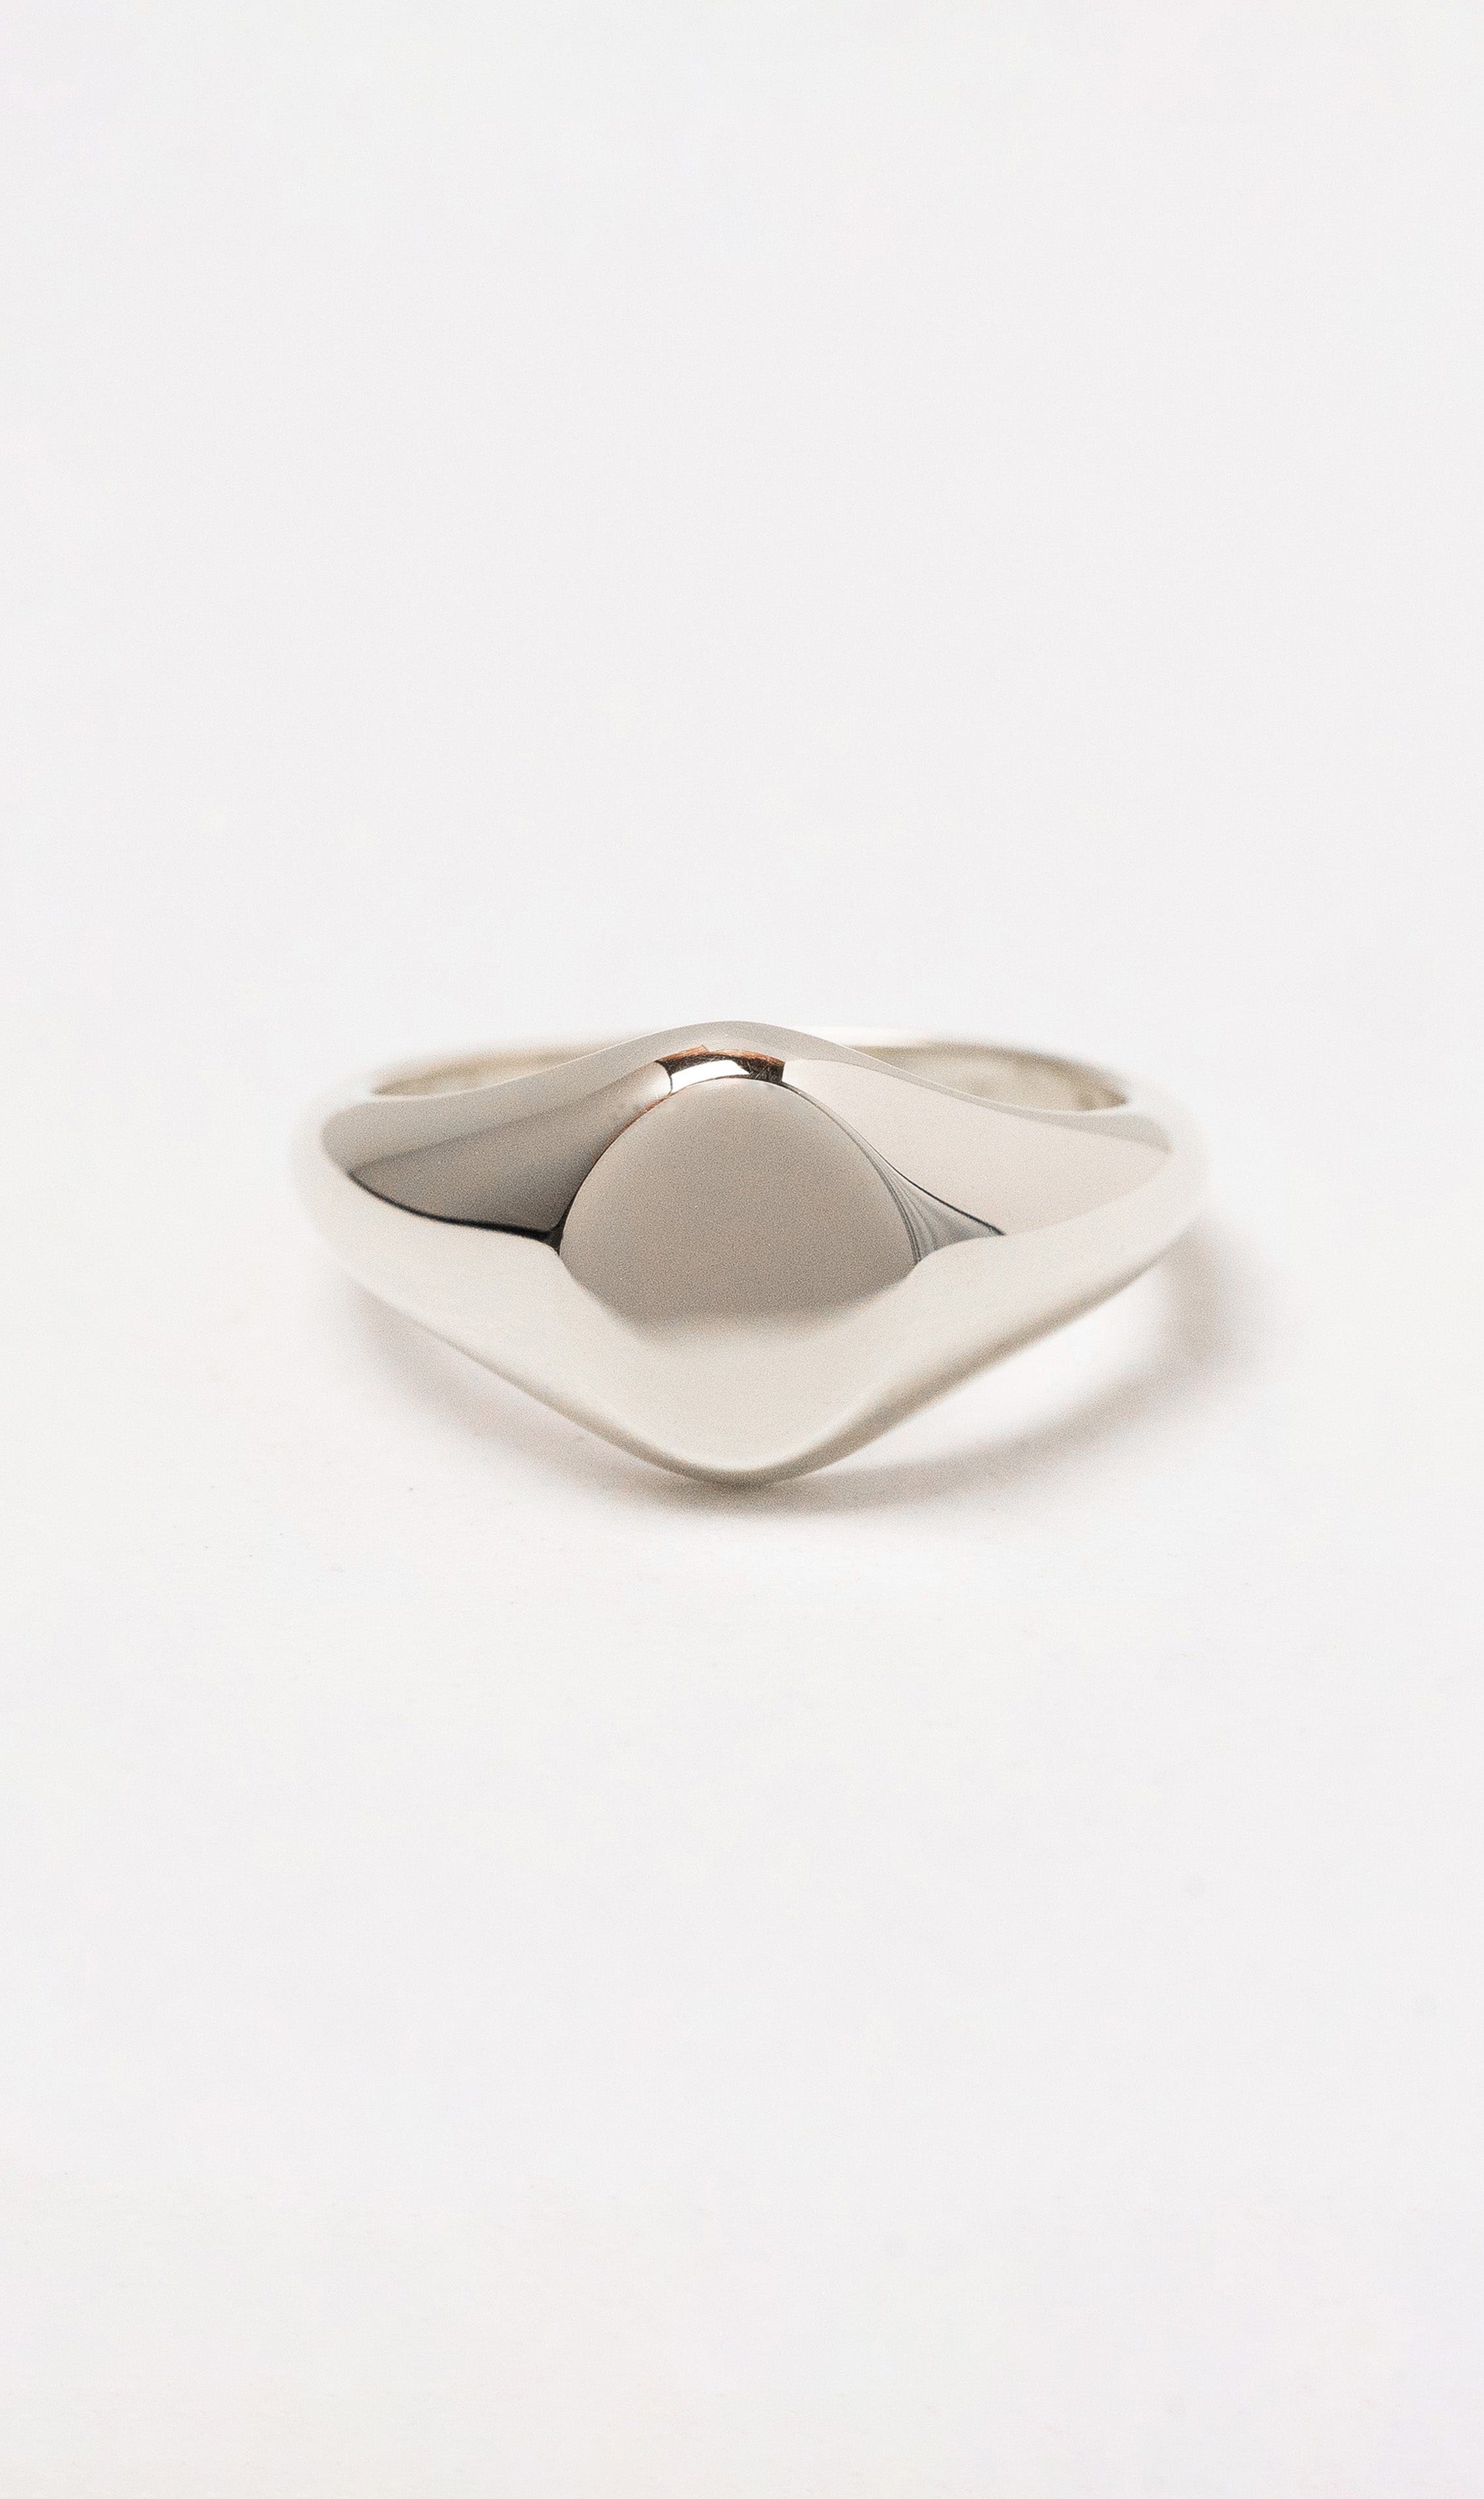 Hogans Family Jewellers 9K Small Oval Signet Ring